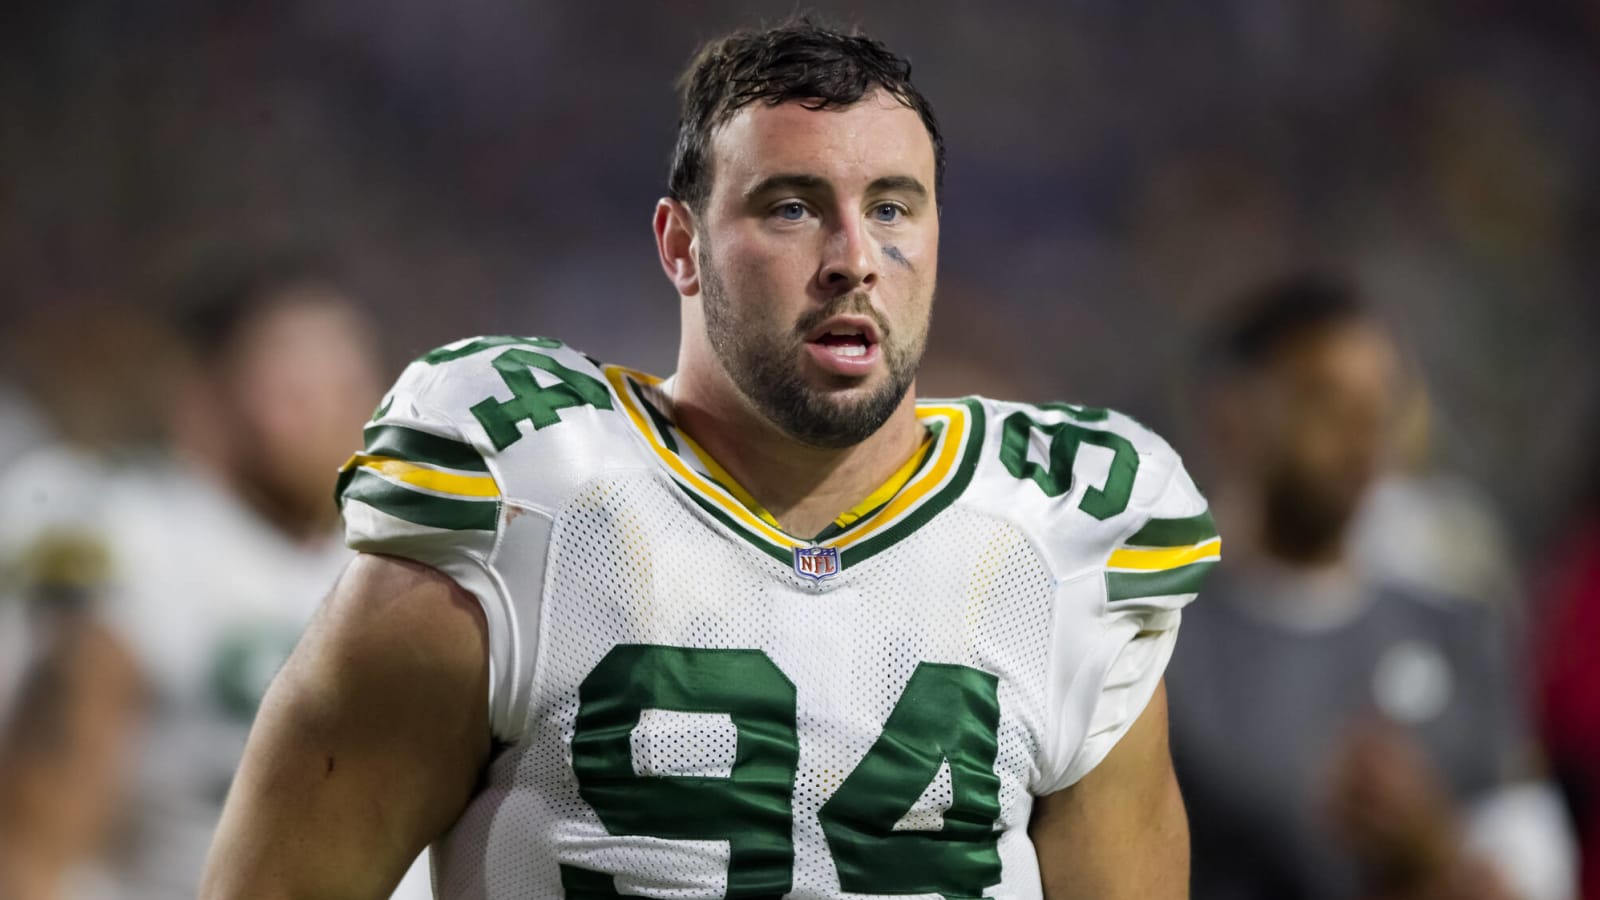 Dean Lowry is a veteran cut candidate for the Packers